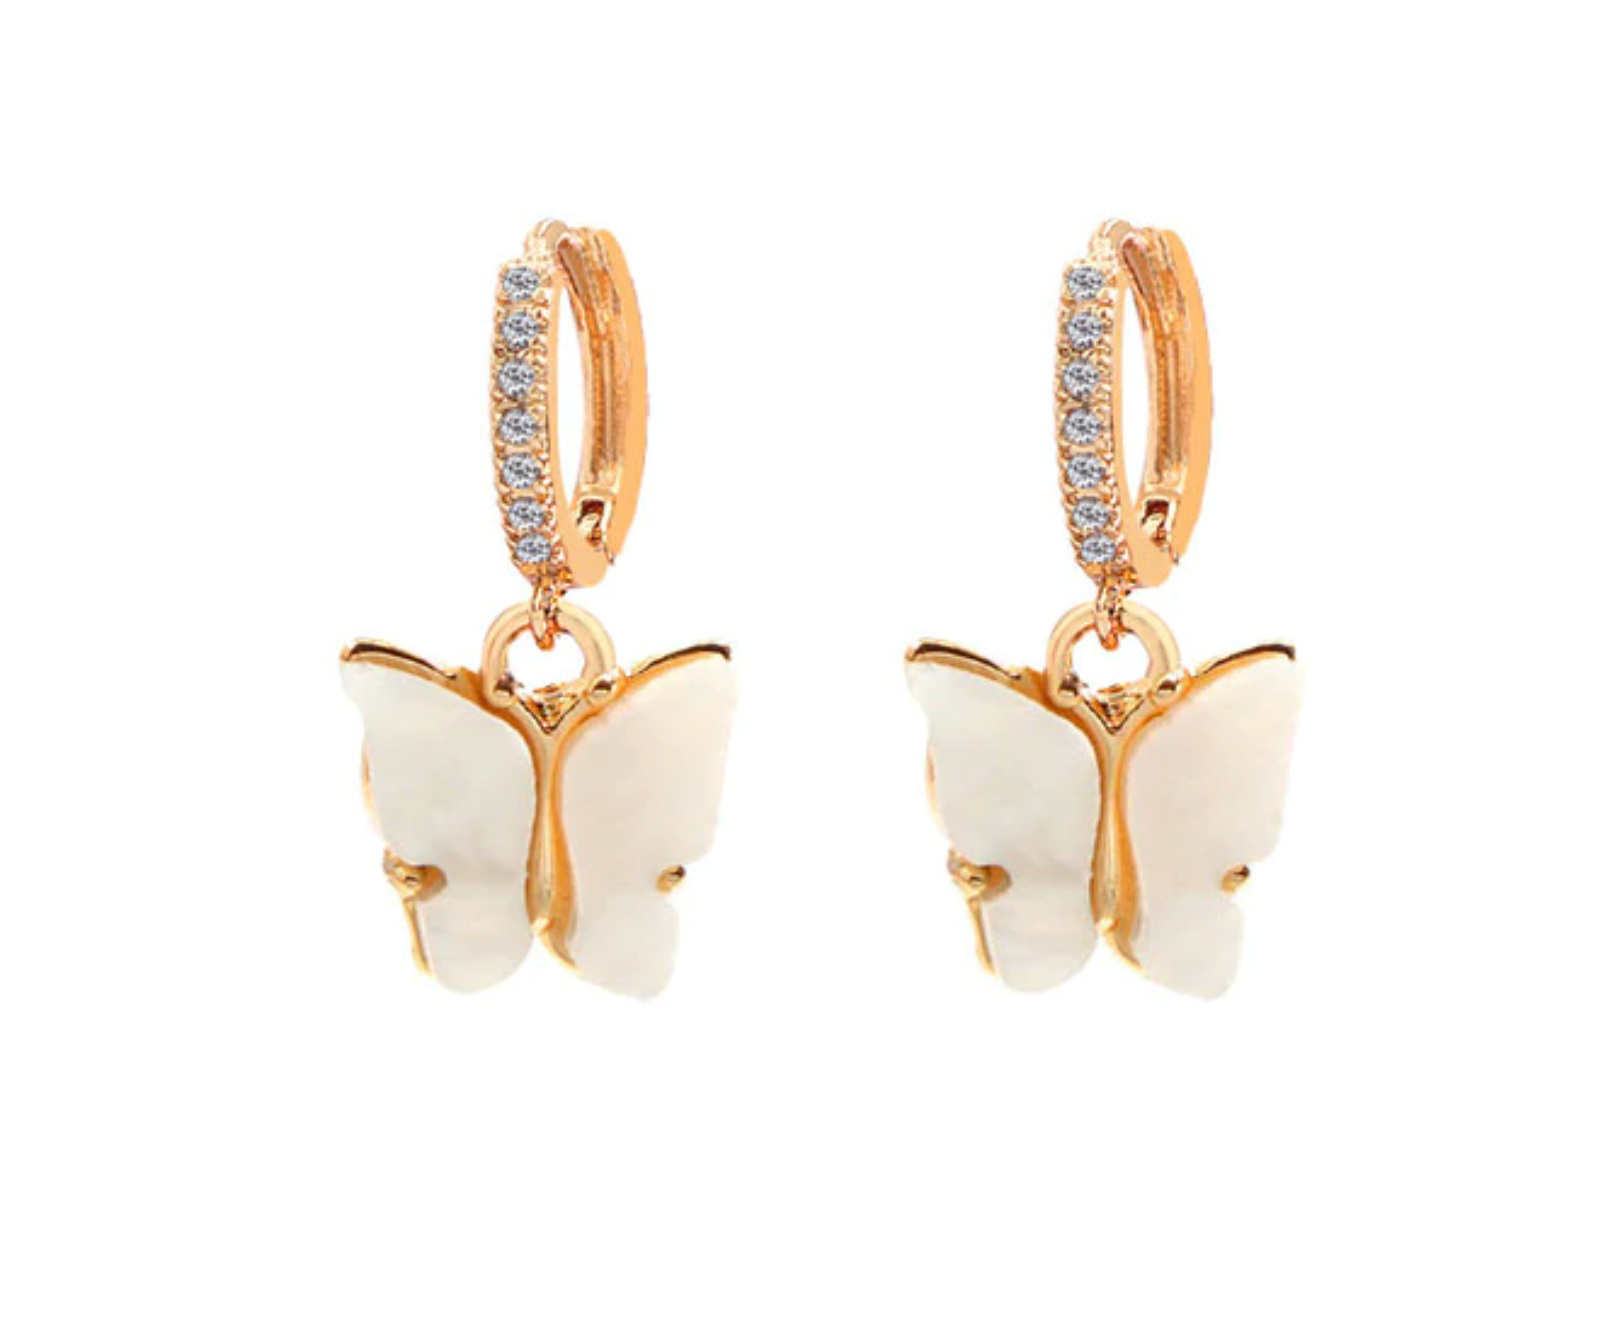 1 pair(2pcs),  Butterfly Drop Earrings in Floral White